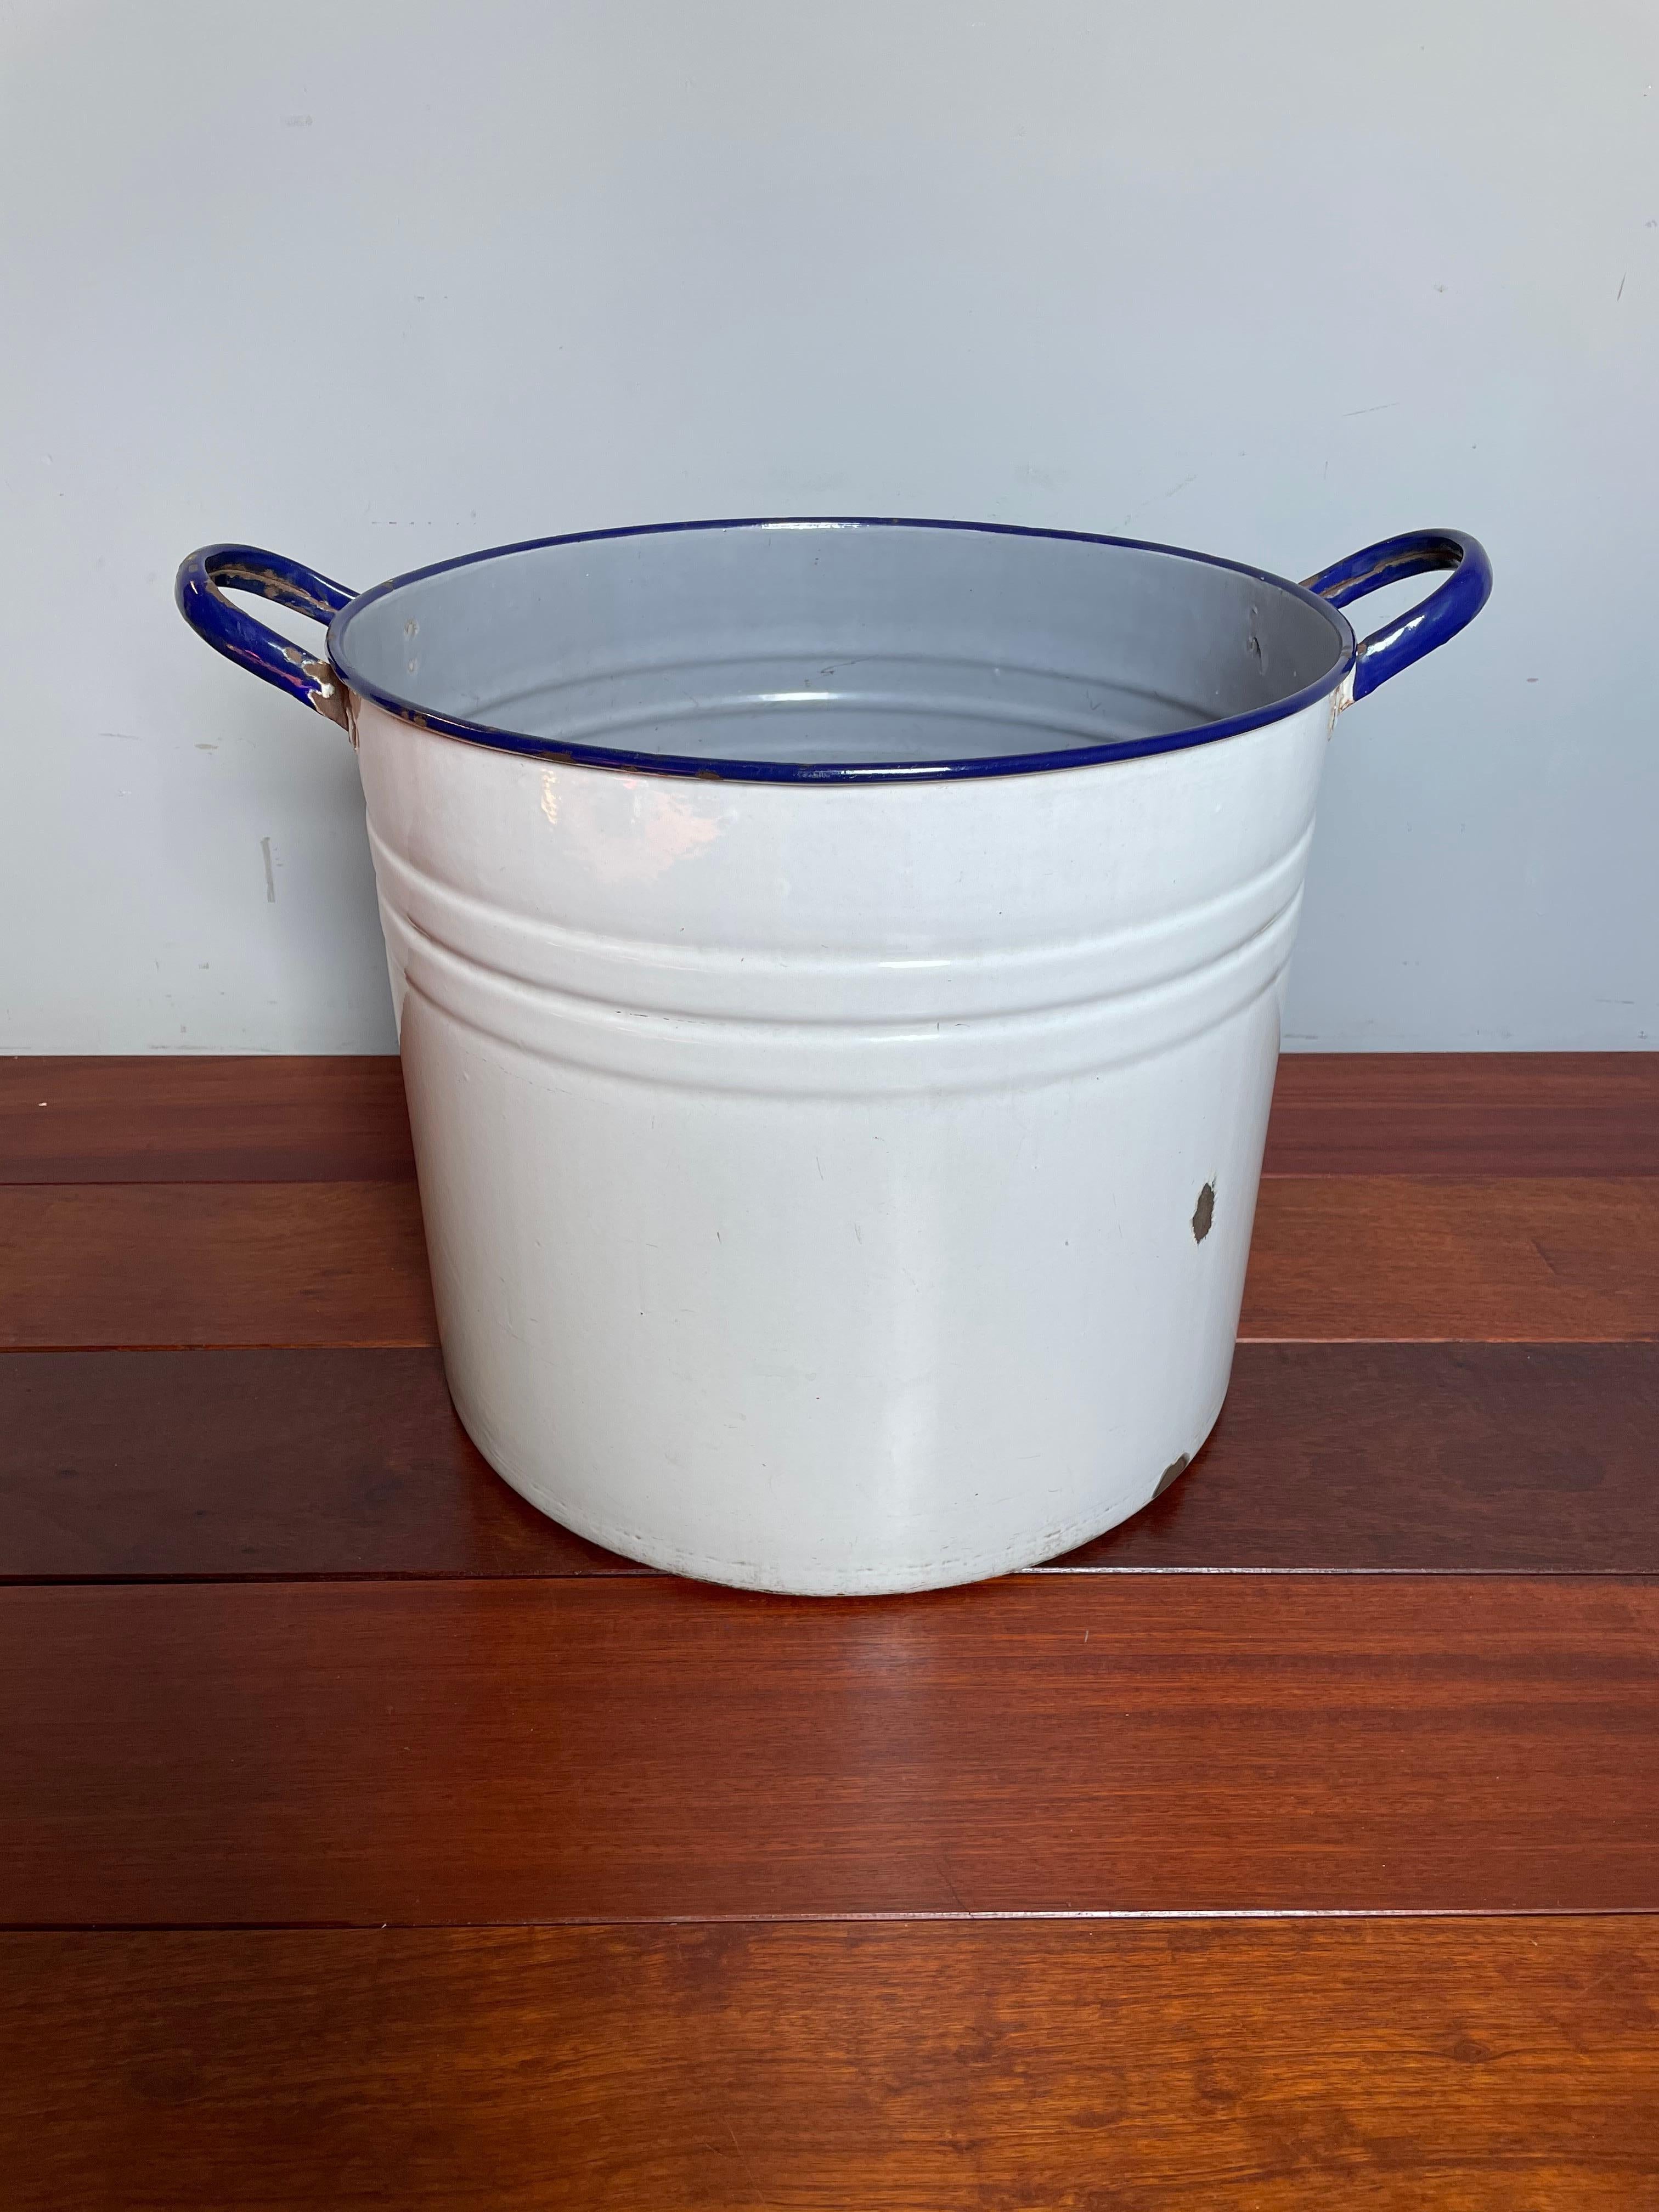 Great shape and rare colors, large enameled bucket with handles.

If you are looking for rare and stylish antiques to decorate your bathroom, laundry room or garden then this handcrafted and large 'tub' could be perfect for you. This early twentieth